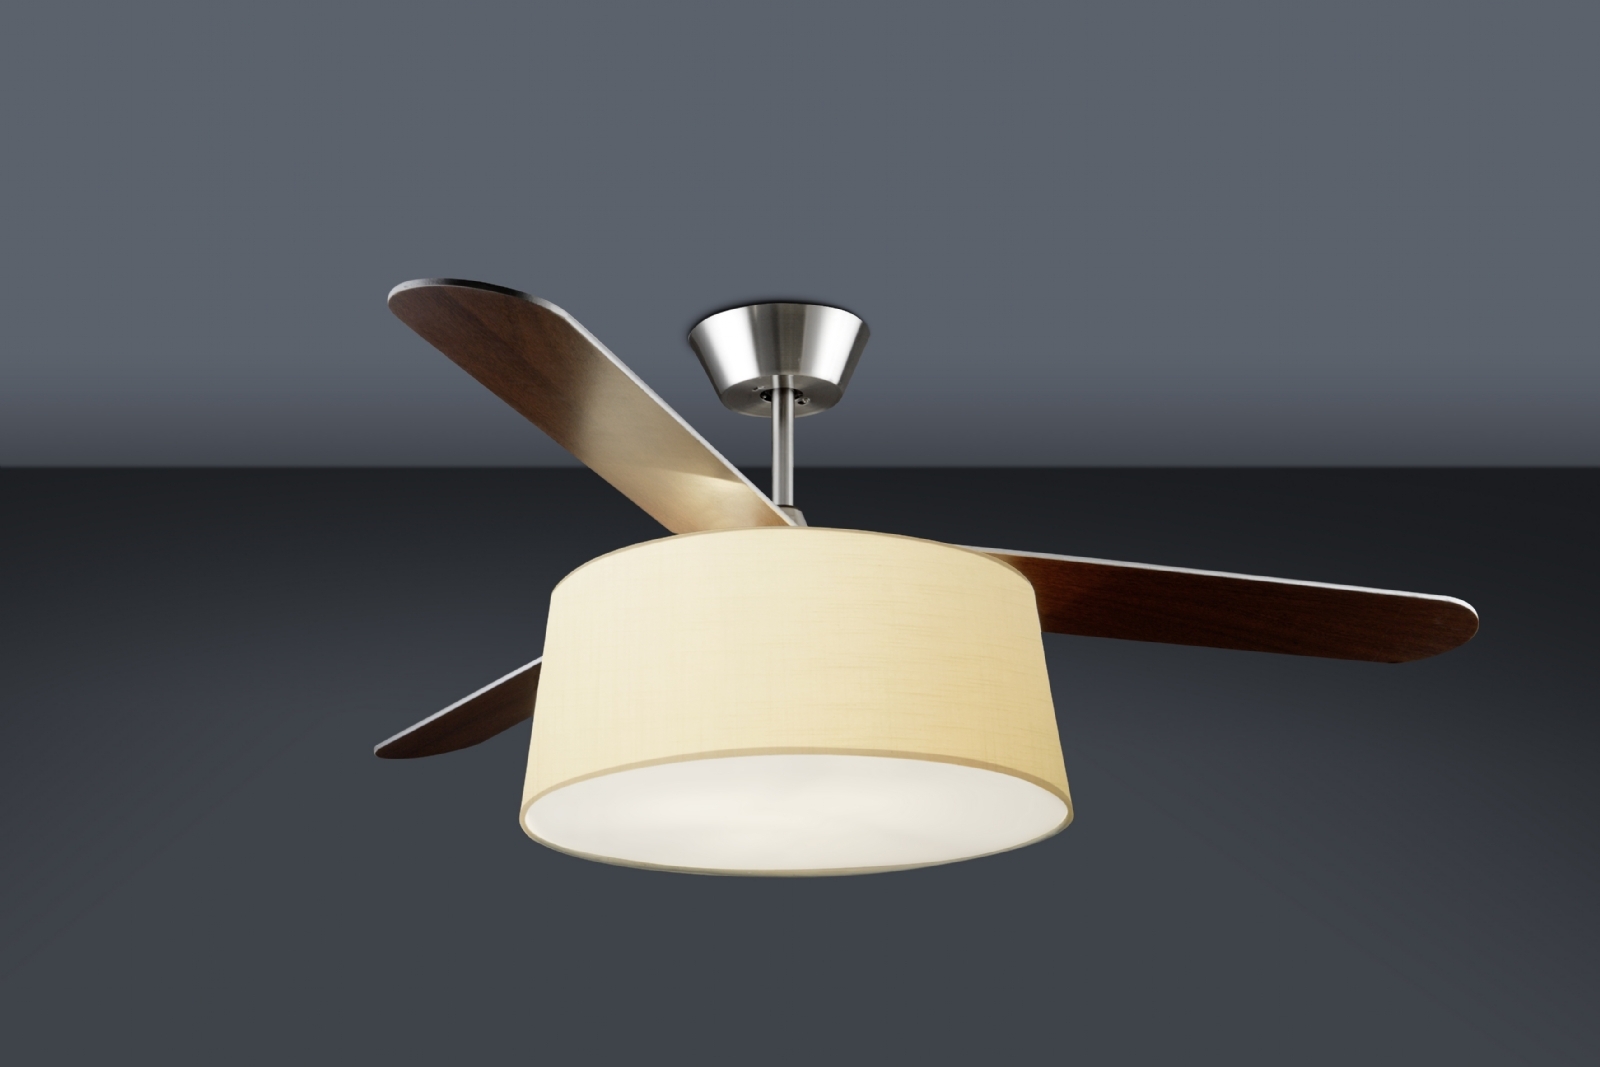 Permalink to Ceiling Fan With Bright Light